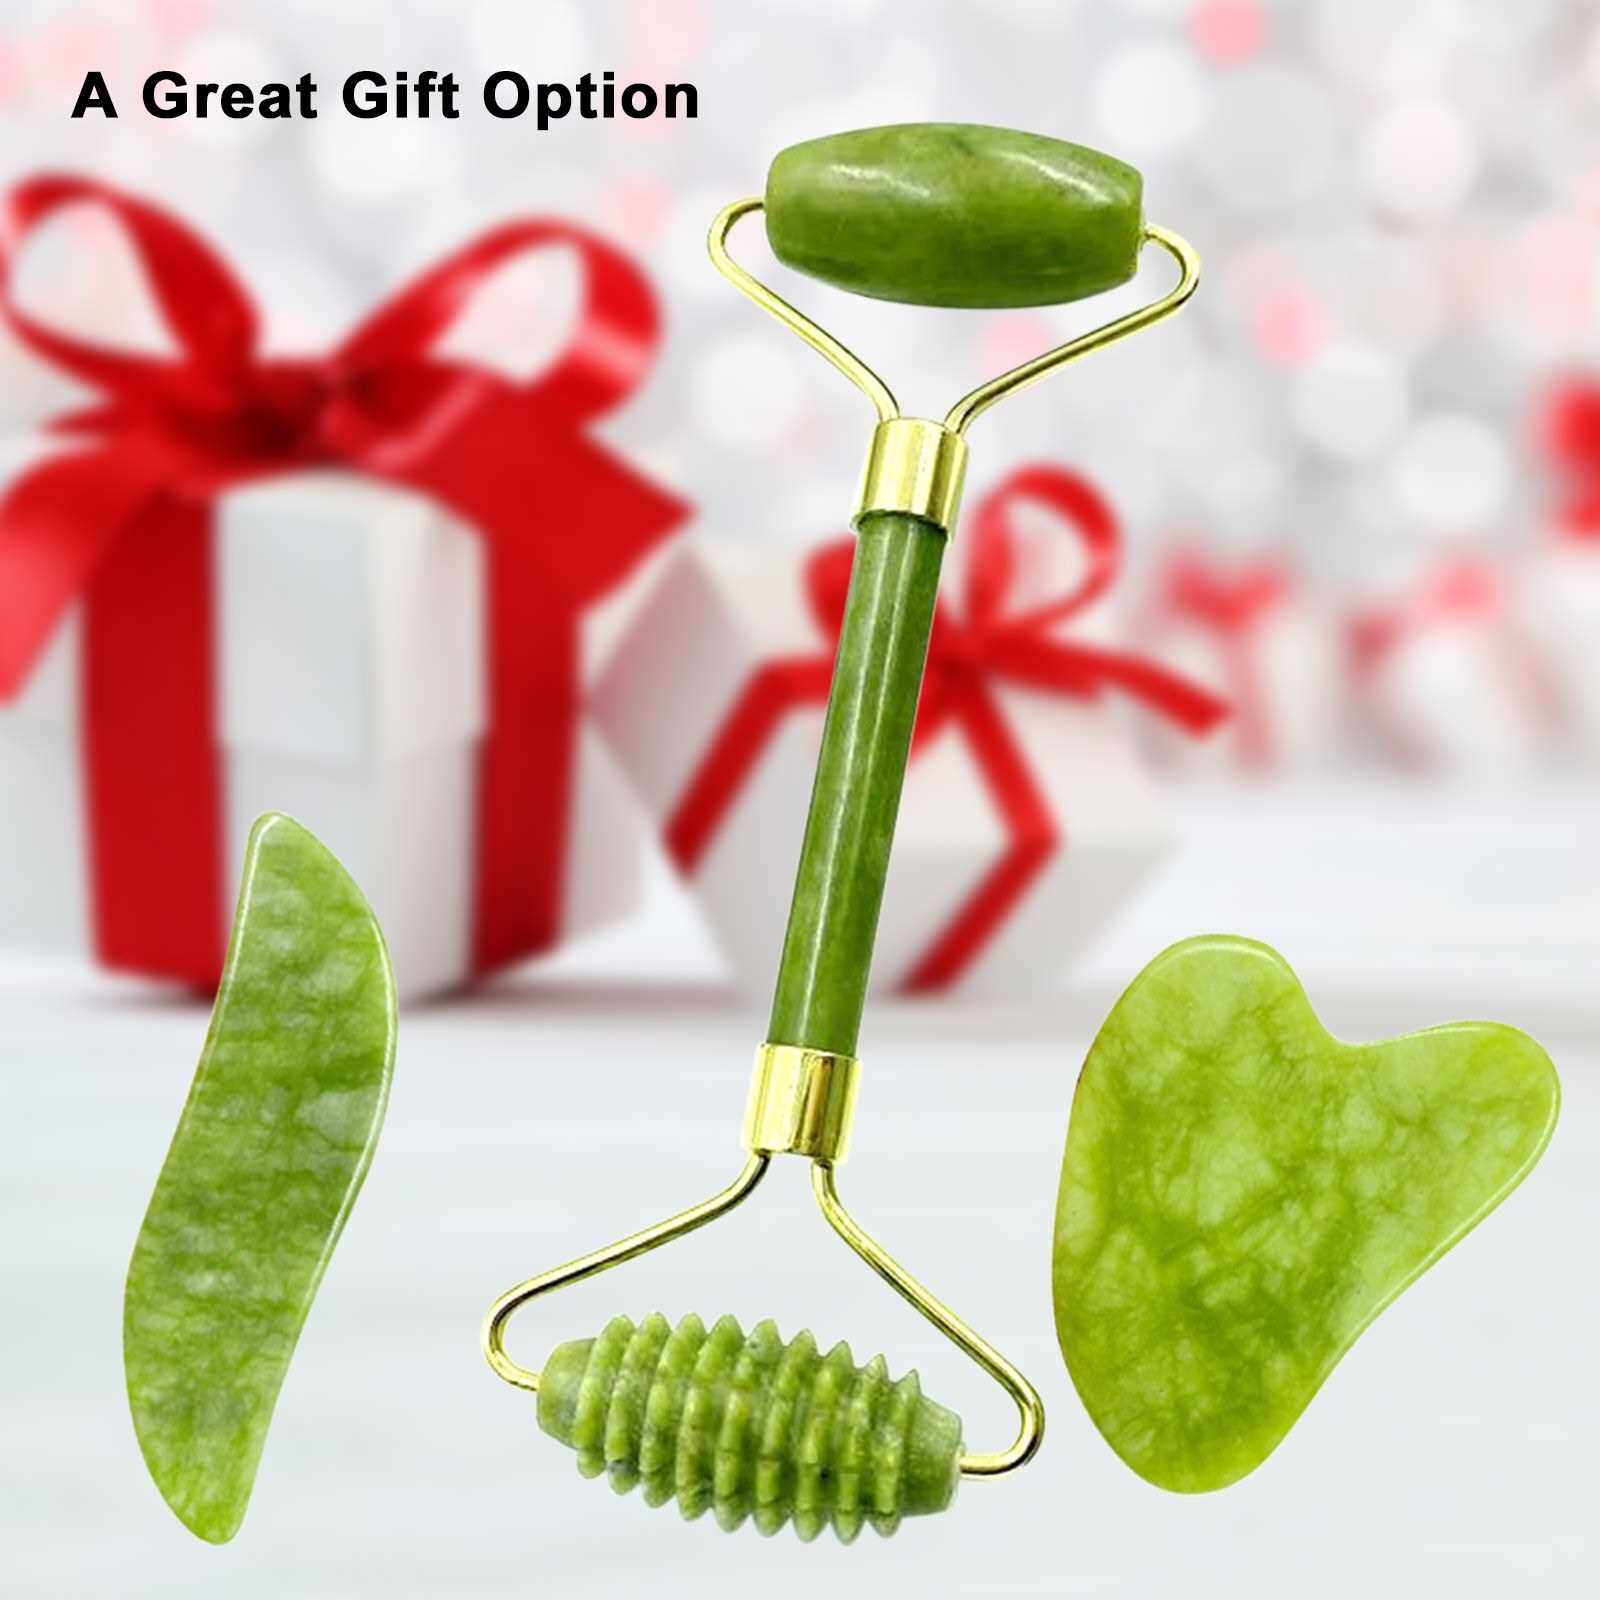 BEST SELLER Jade Stone Set Jade Roller & 2 Gua Sha Scrapers in Different Shapes Massage Tools for Facial Skin Care Anti-aging Face Eye Neck Beauty Roller Facial Massager (Standard)